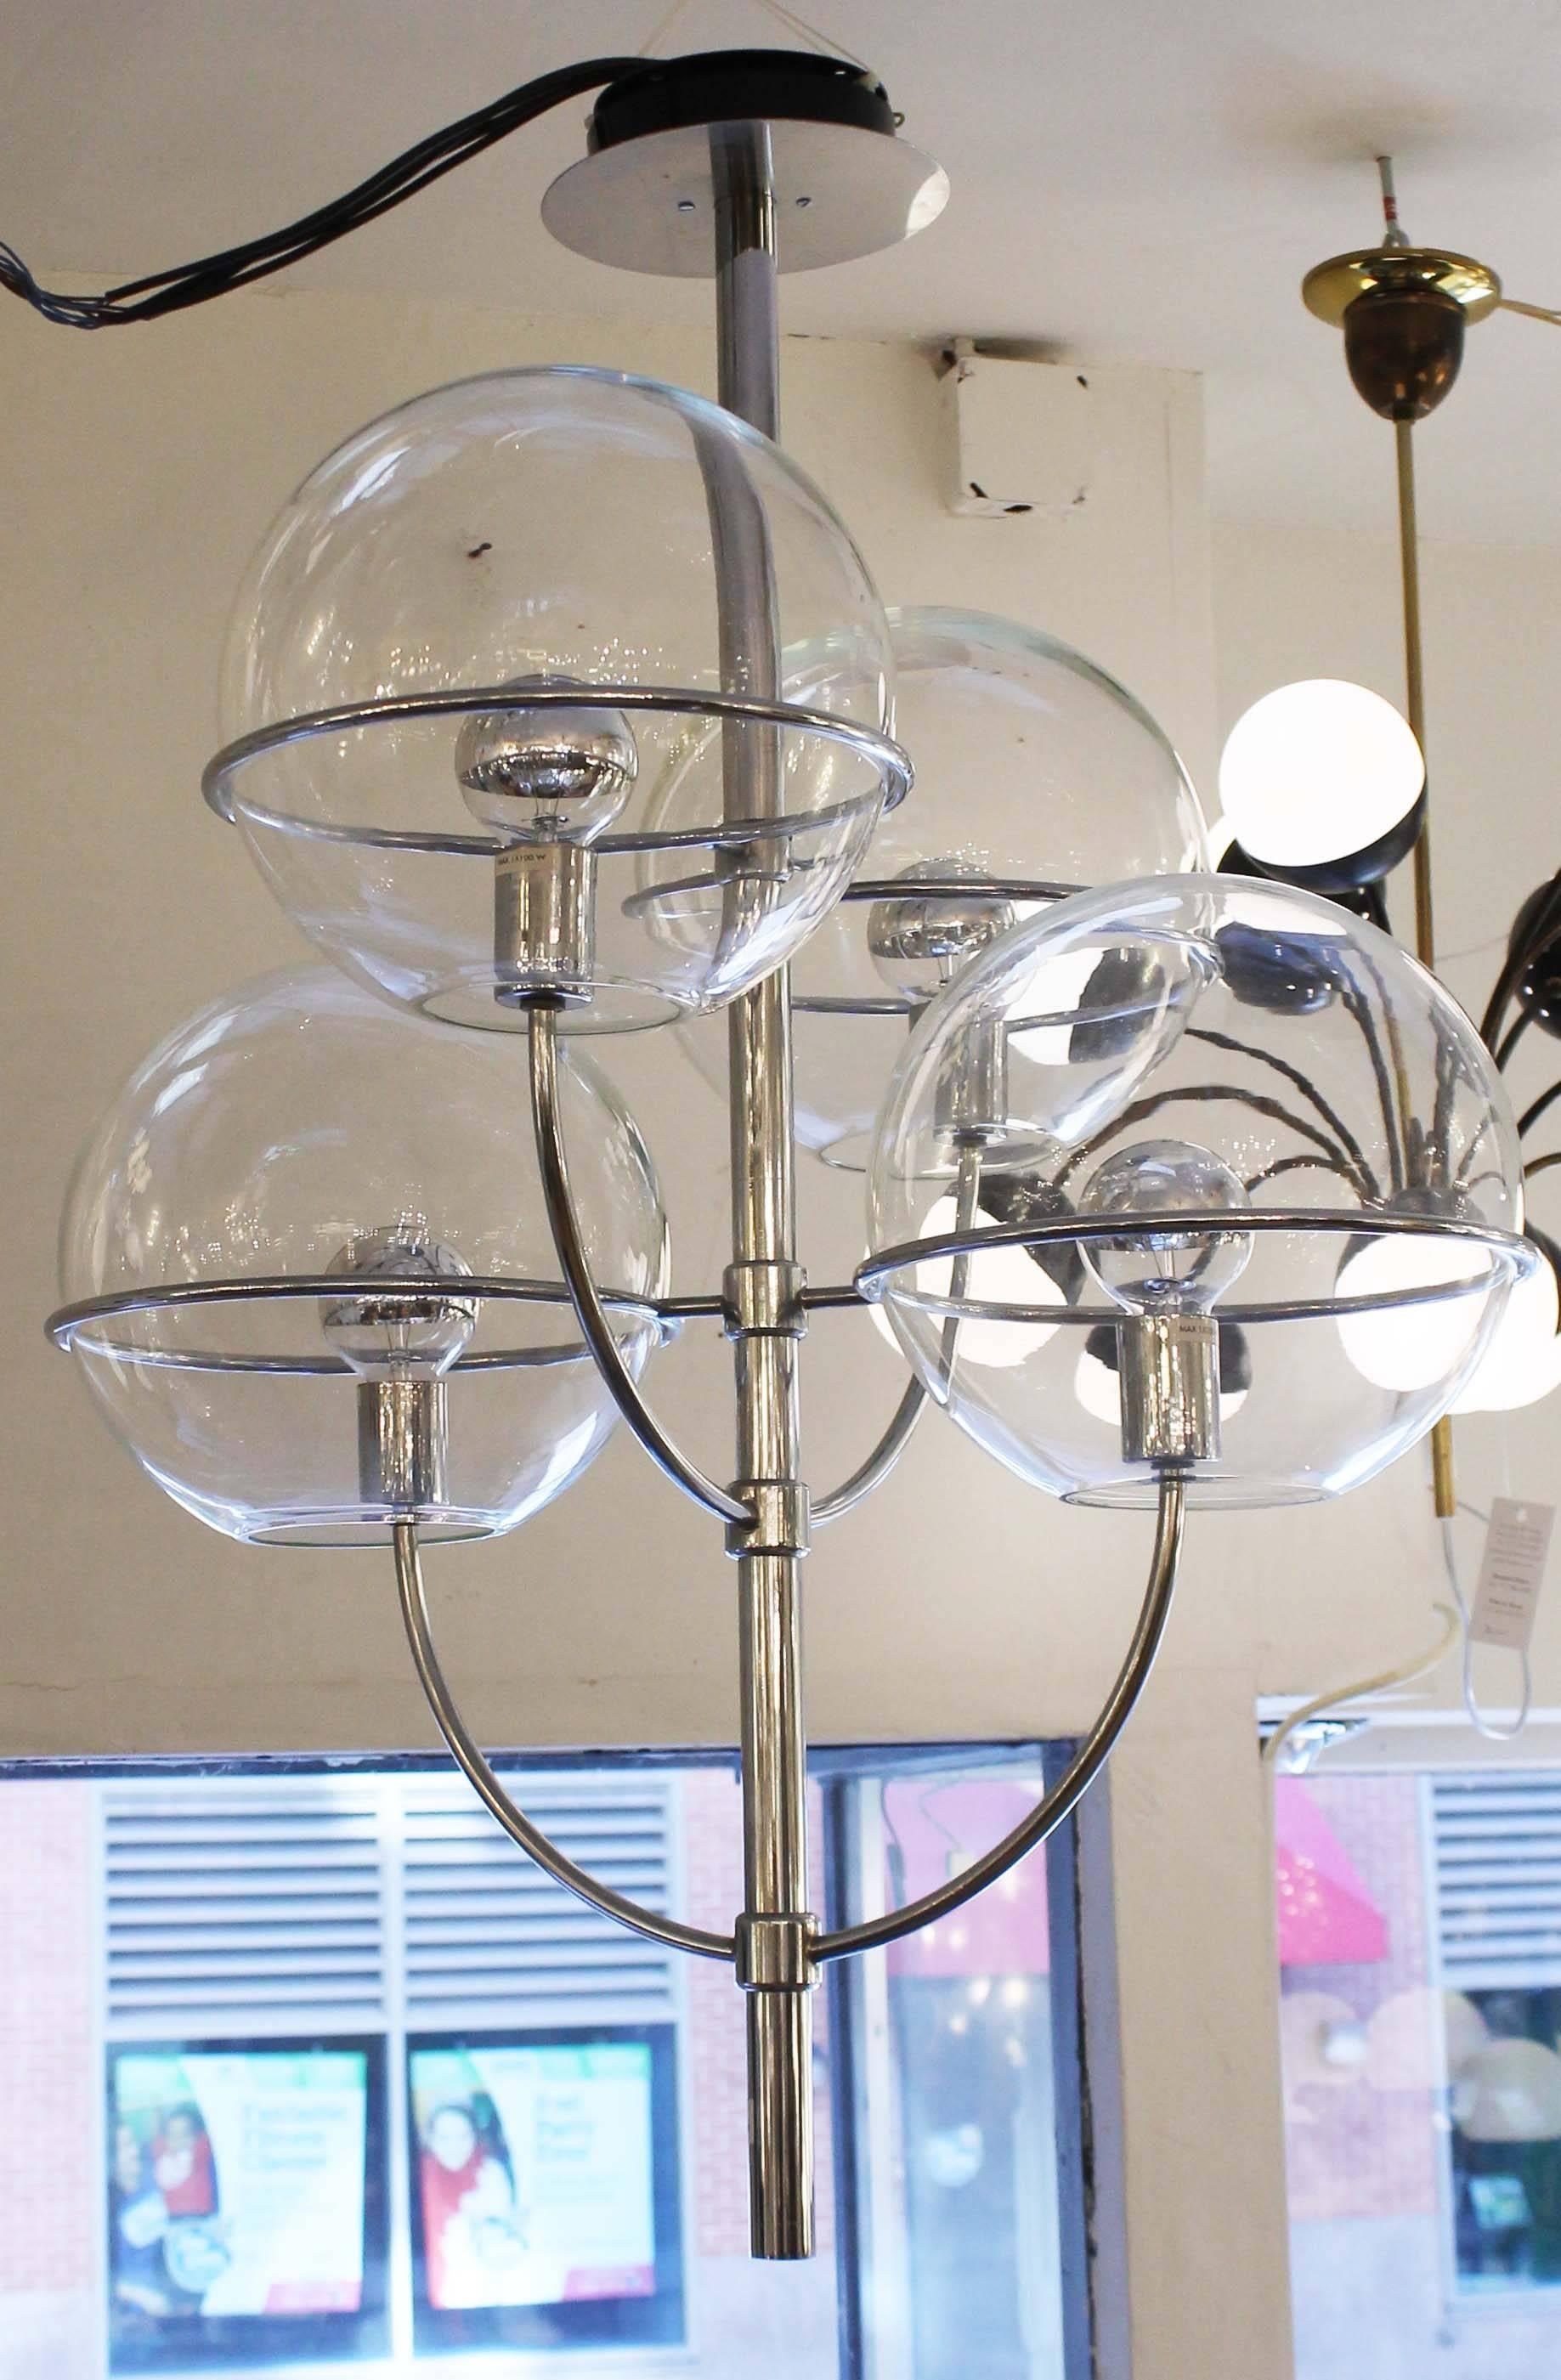 Lindon model chandelier designed by Vico Magistretti for O-Luce featuring four large glass shades on a chrome frame. Holds four regular edison sockets with the capacity of providing a lot of light. Shades can be frosted on request. Comes with a 20”